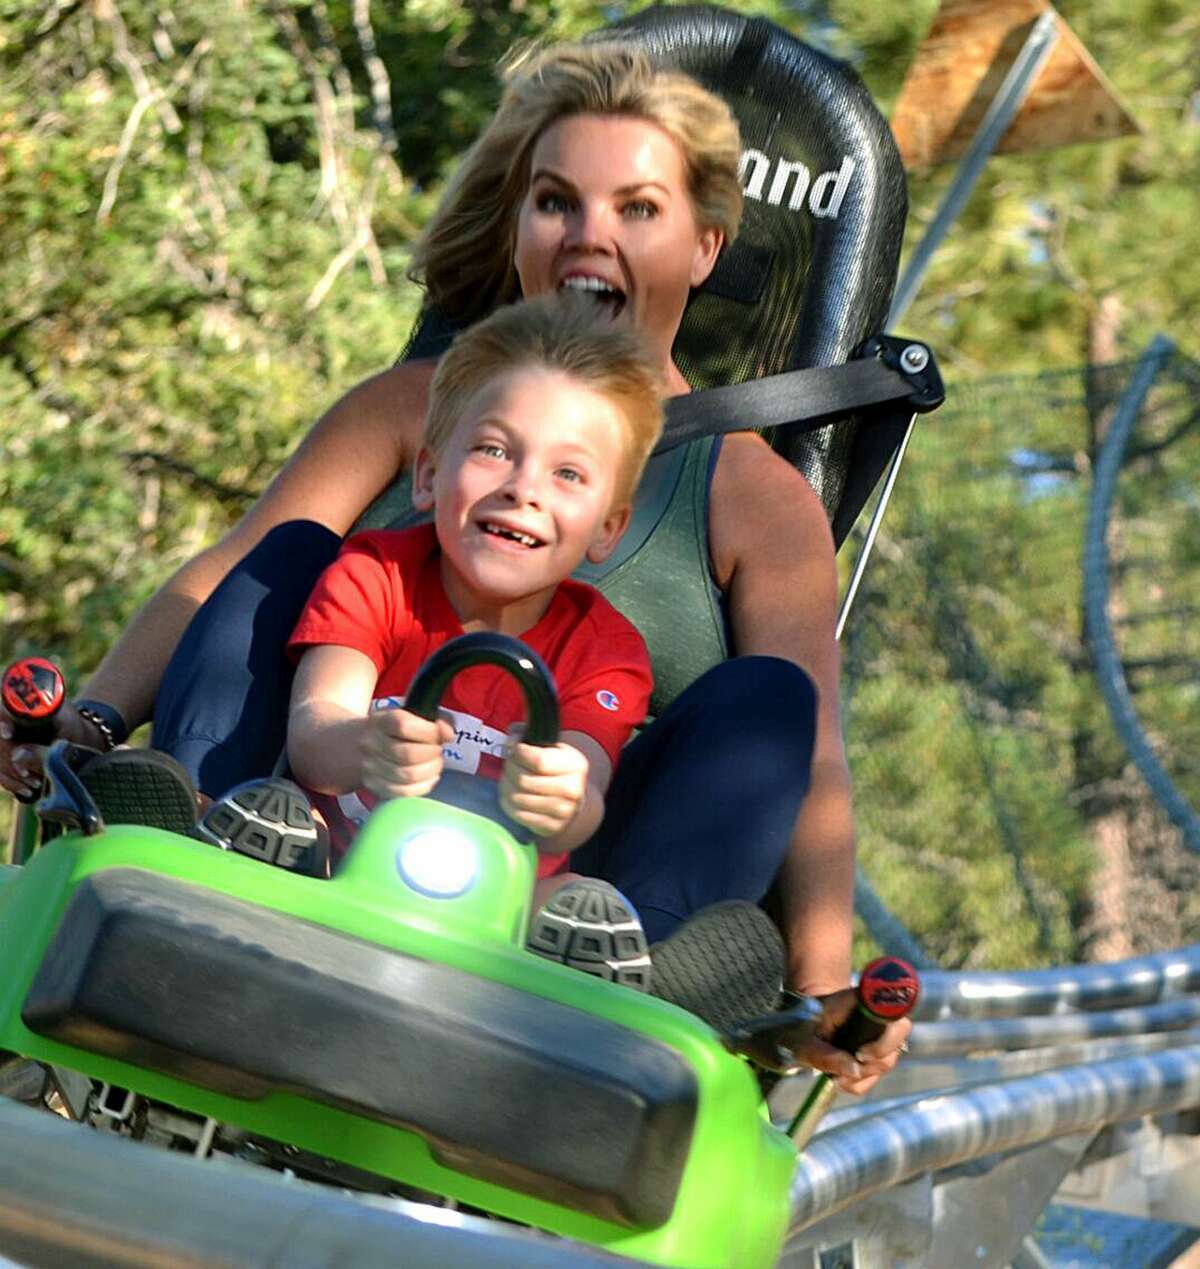 Aerie's Resort in Grafton has opened the first-ever alpine coaster in Illinois. A ribbon cutting ceremony for the 3,000-foot railed coaster is planned Tuesday in Grafton.